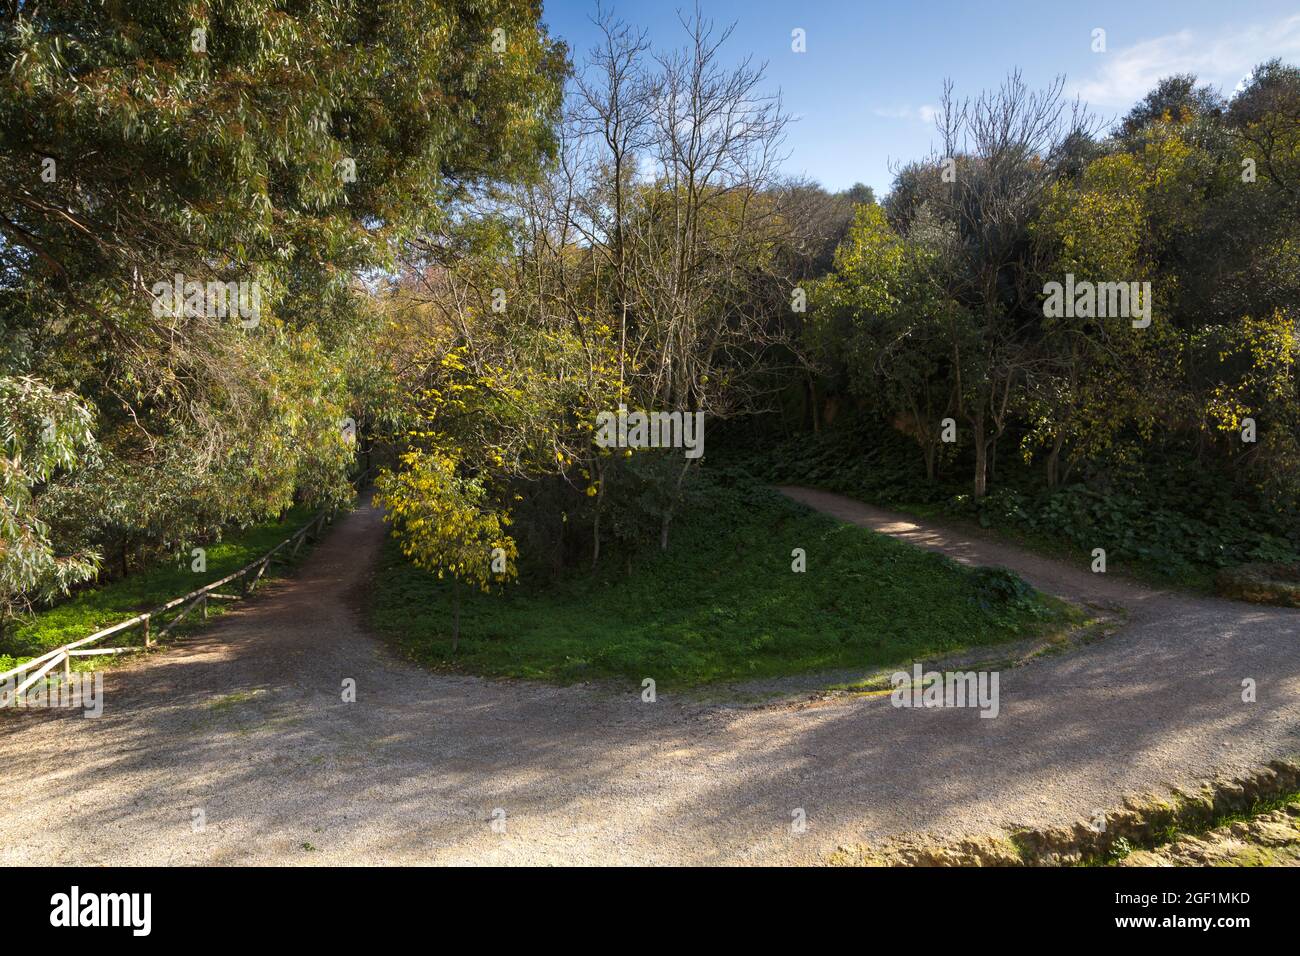 Landscaped picture of a pathway in an andalusian park Stock Photo